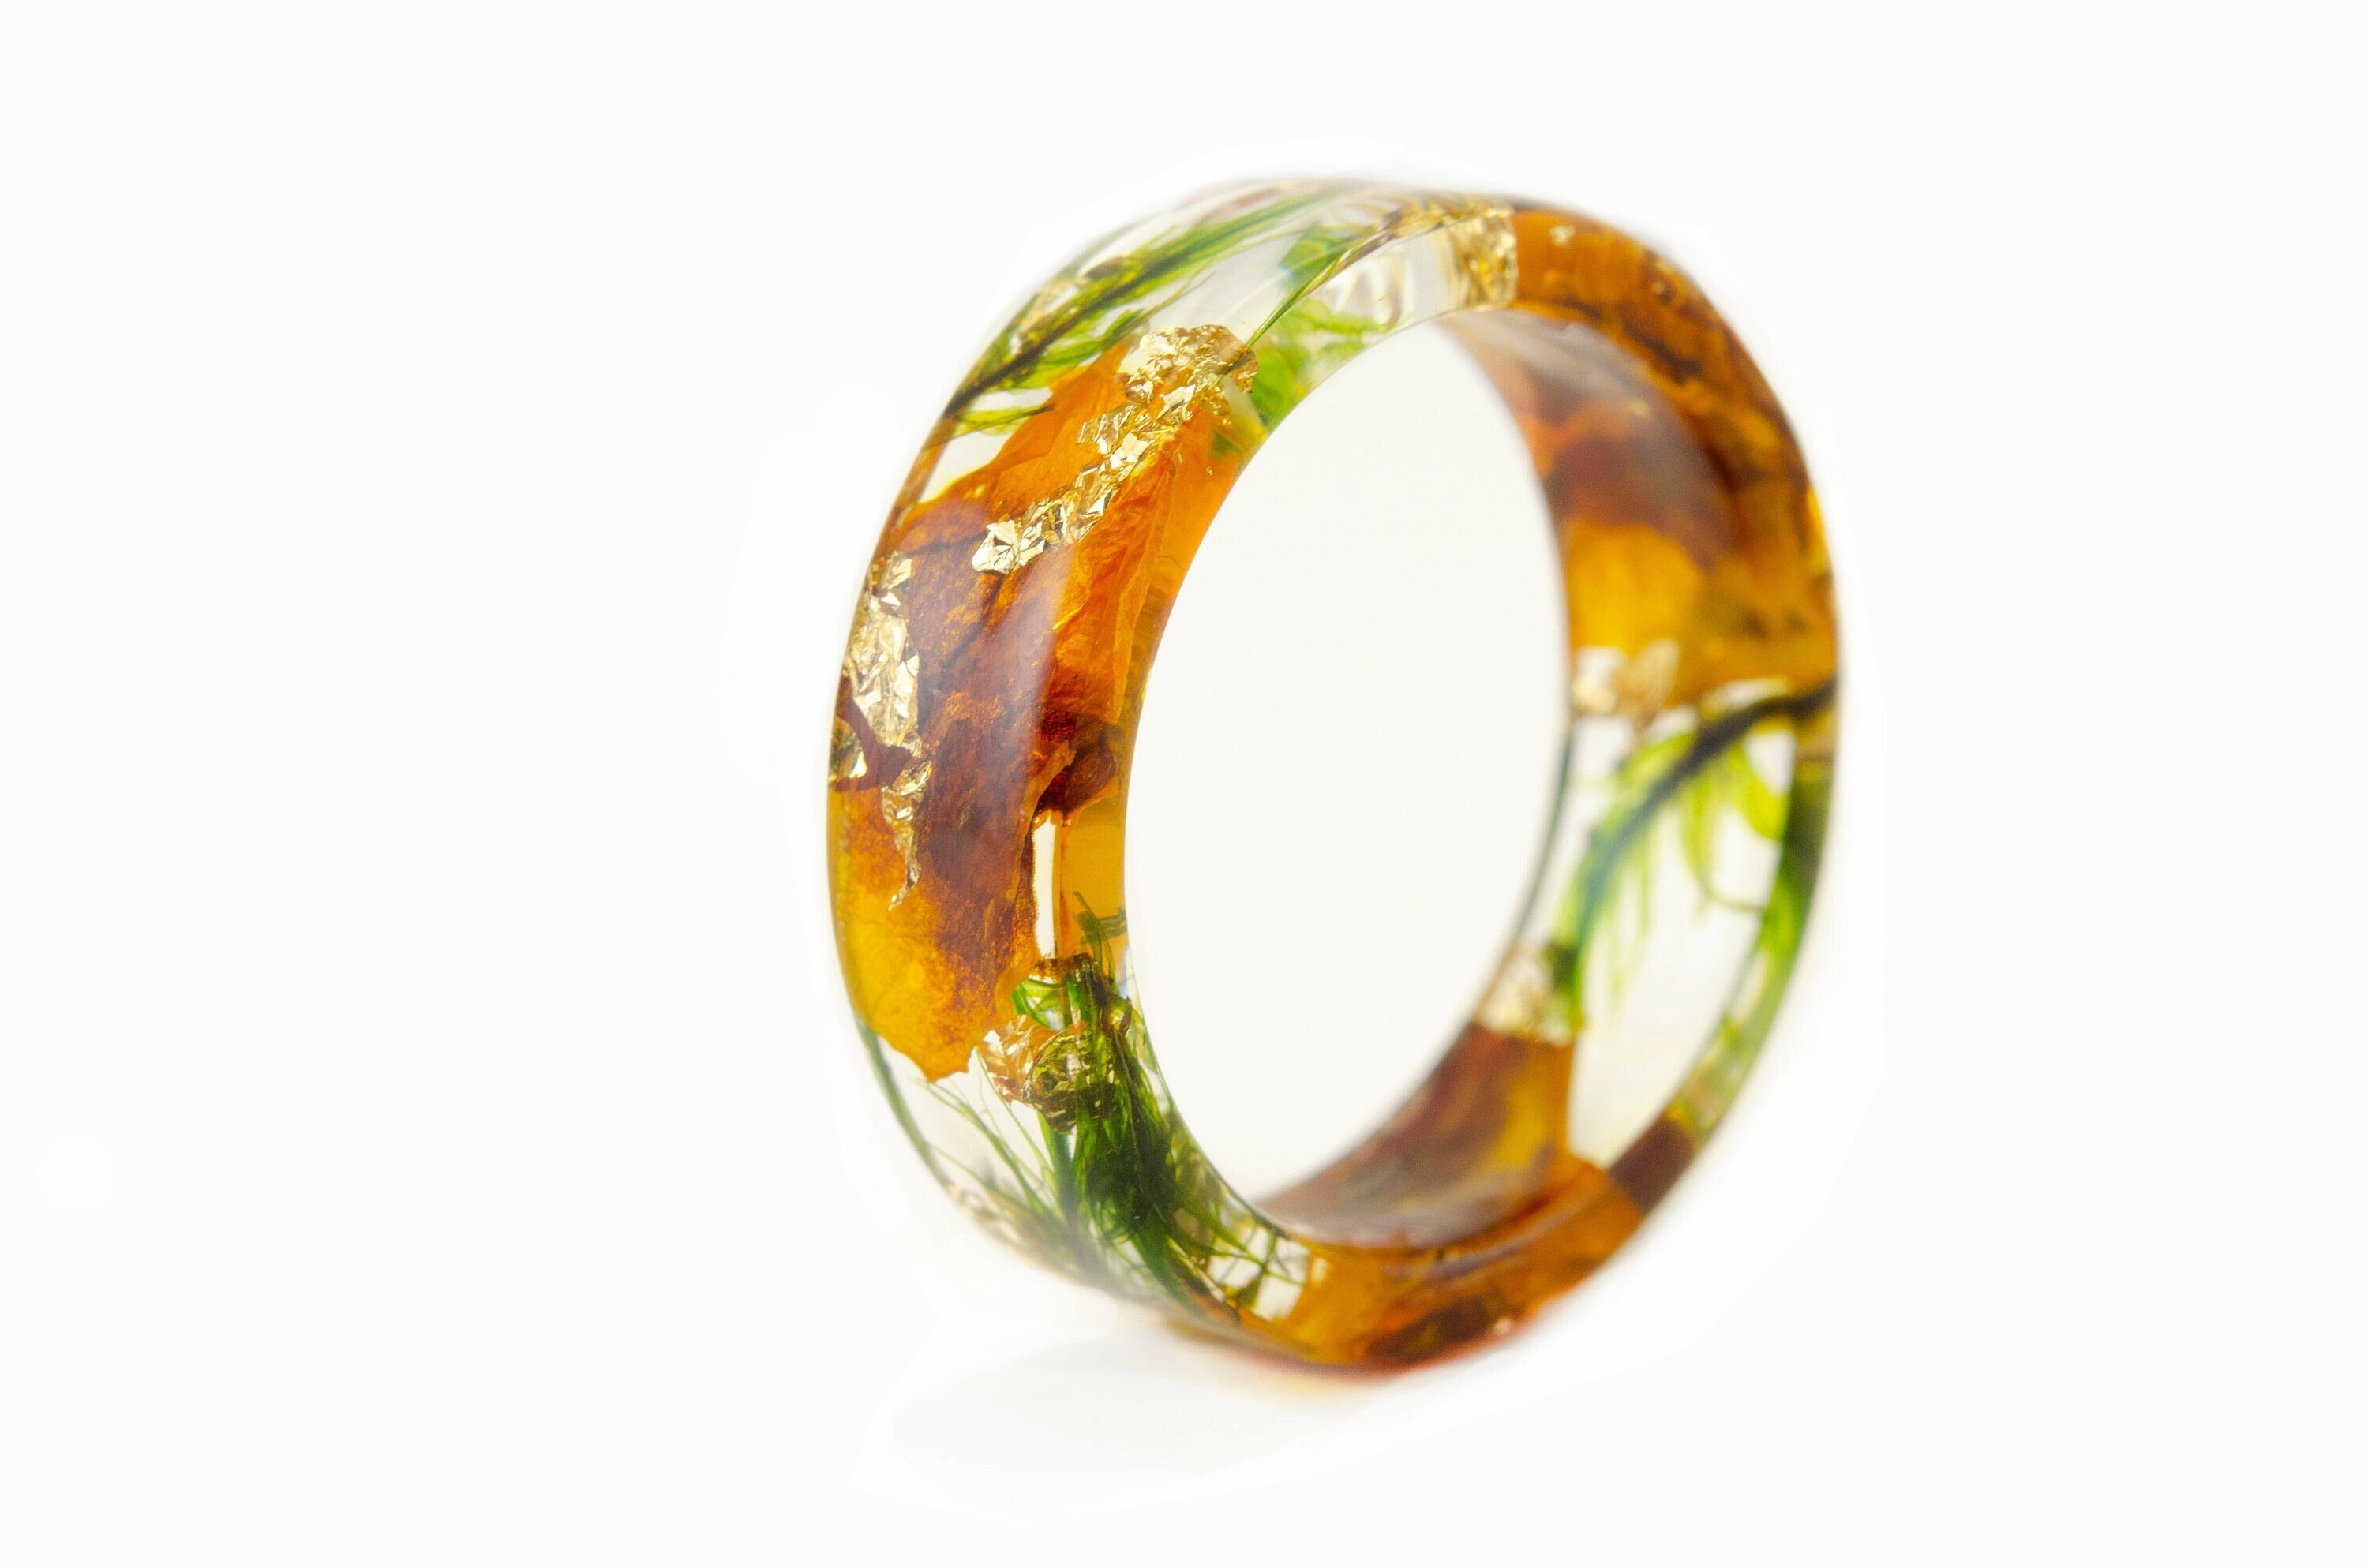 Resin Rings, with Dried Grass, Gold Foil, Green, 16mm Resin Green